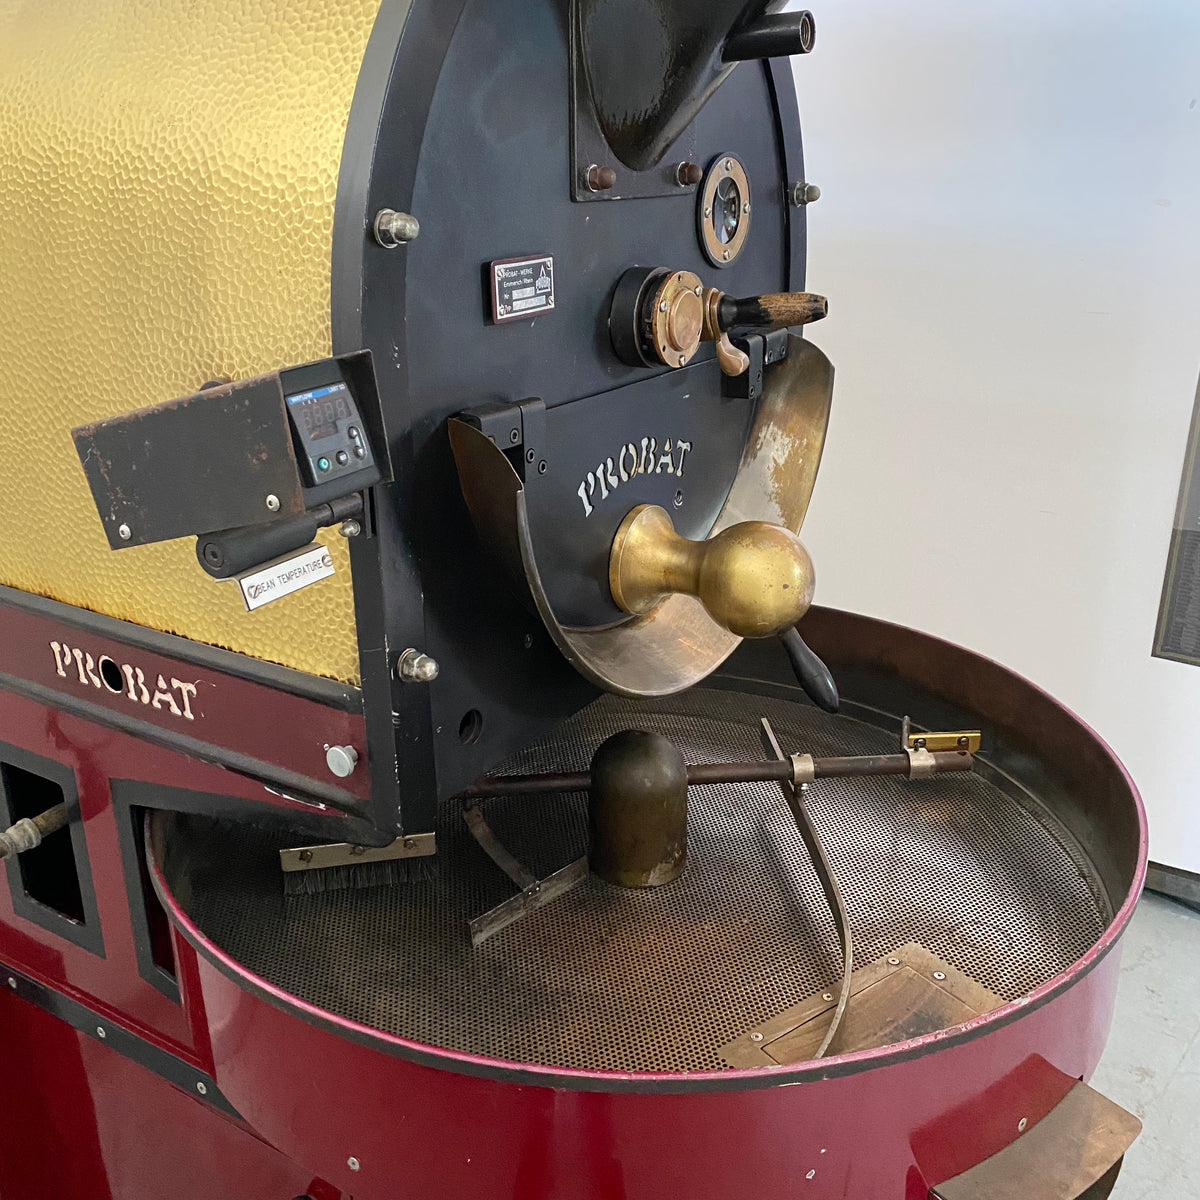 We have the Larger Scale Food Grade Mixers You Want — CoffeeTec